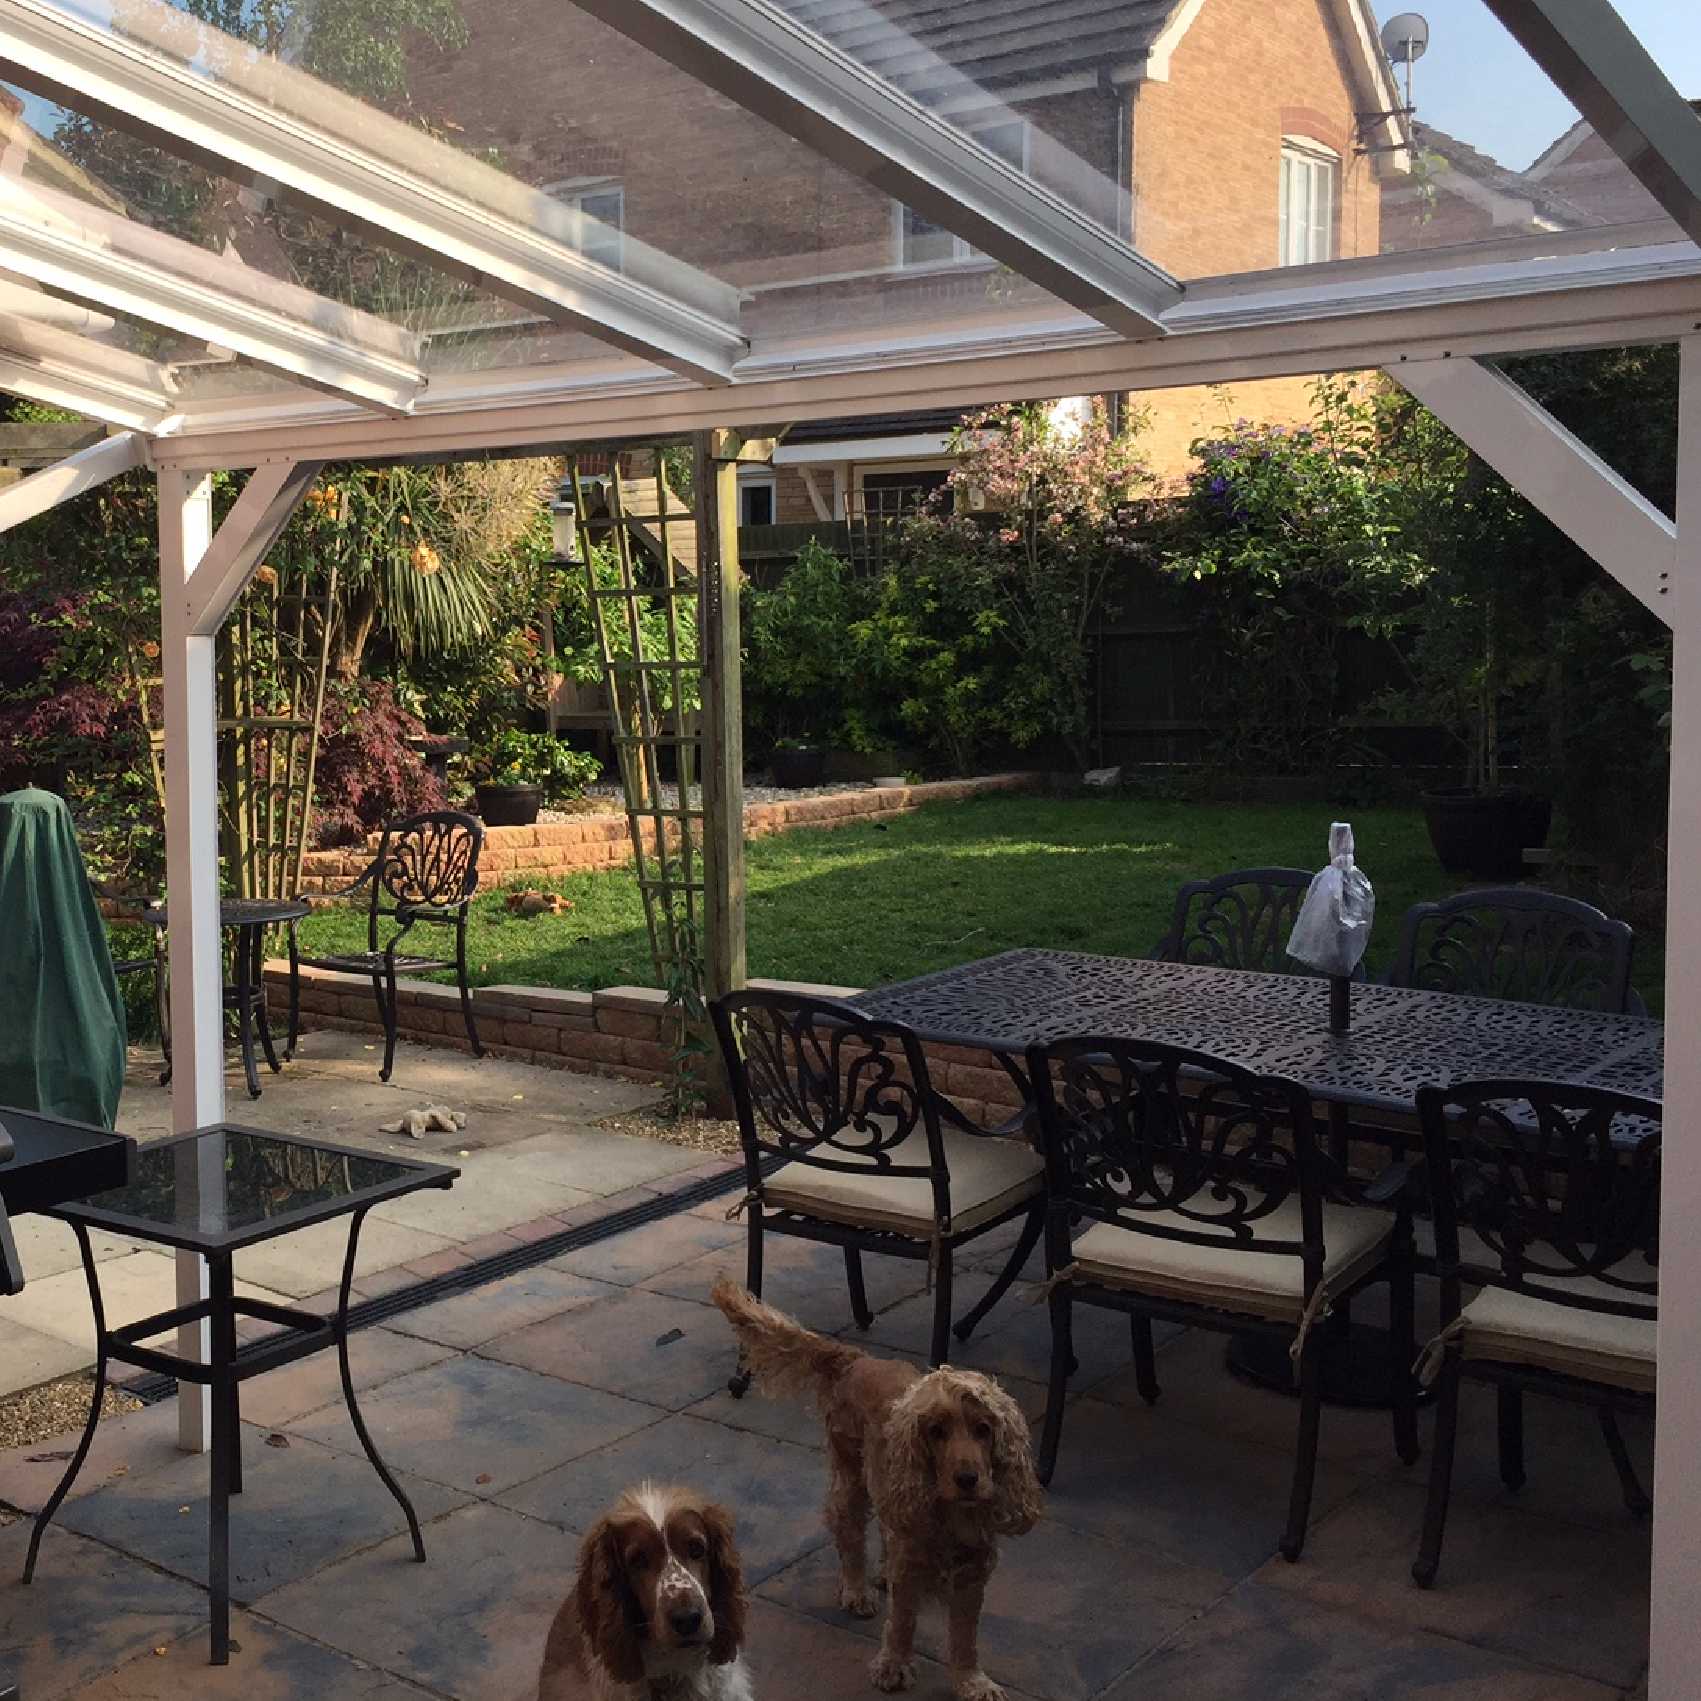 Affordable Omega Smart Lean-To Canopy, White UNGLAZED for 6mm Glazing - 10.5m (W) x 2.5m (P), (5) Supporting Posts